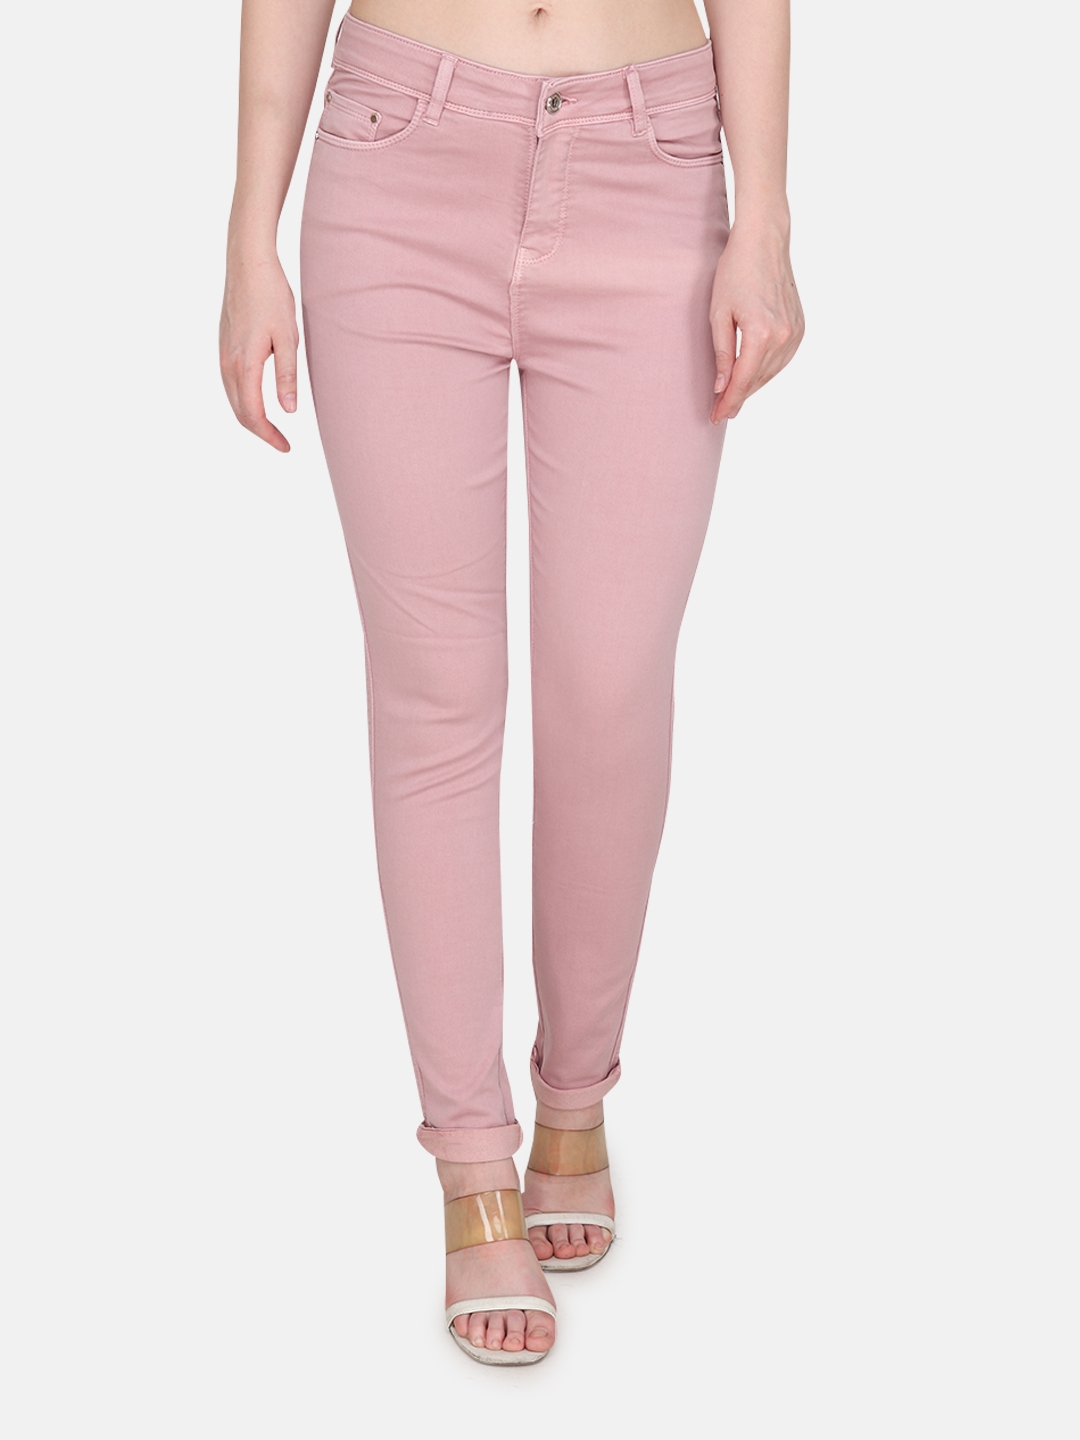 Albion | Albion By CnM Women Pink Denim Stretchable Jeans 0